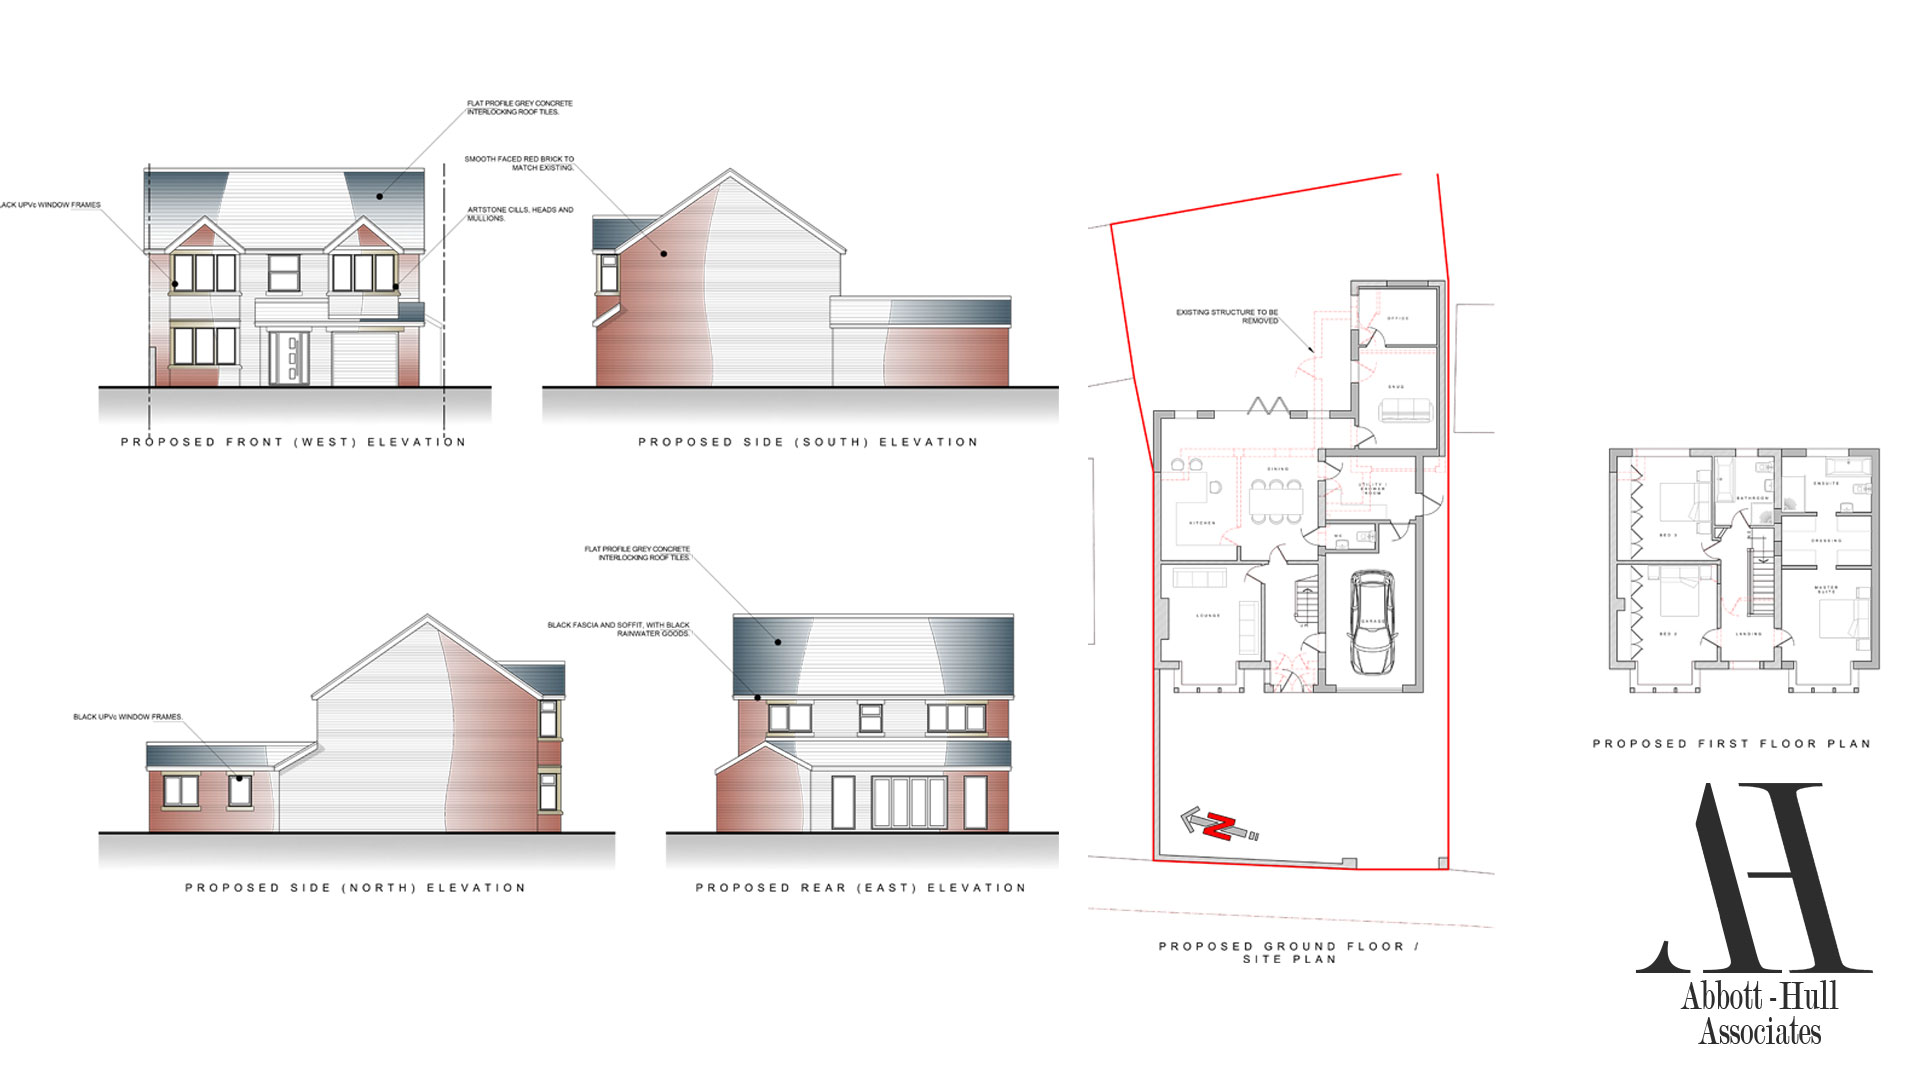 Marsh Road, Thornton-Cleveleys, House Extension - Proposed Plans